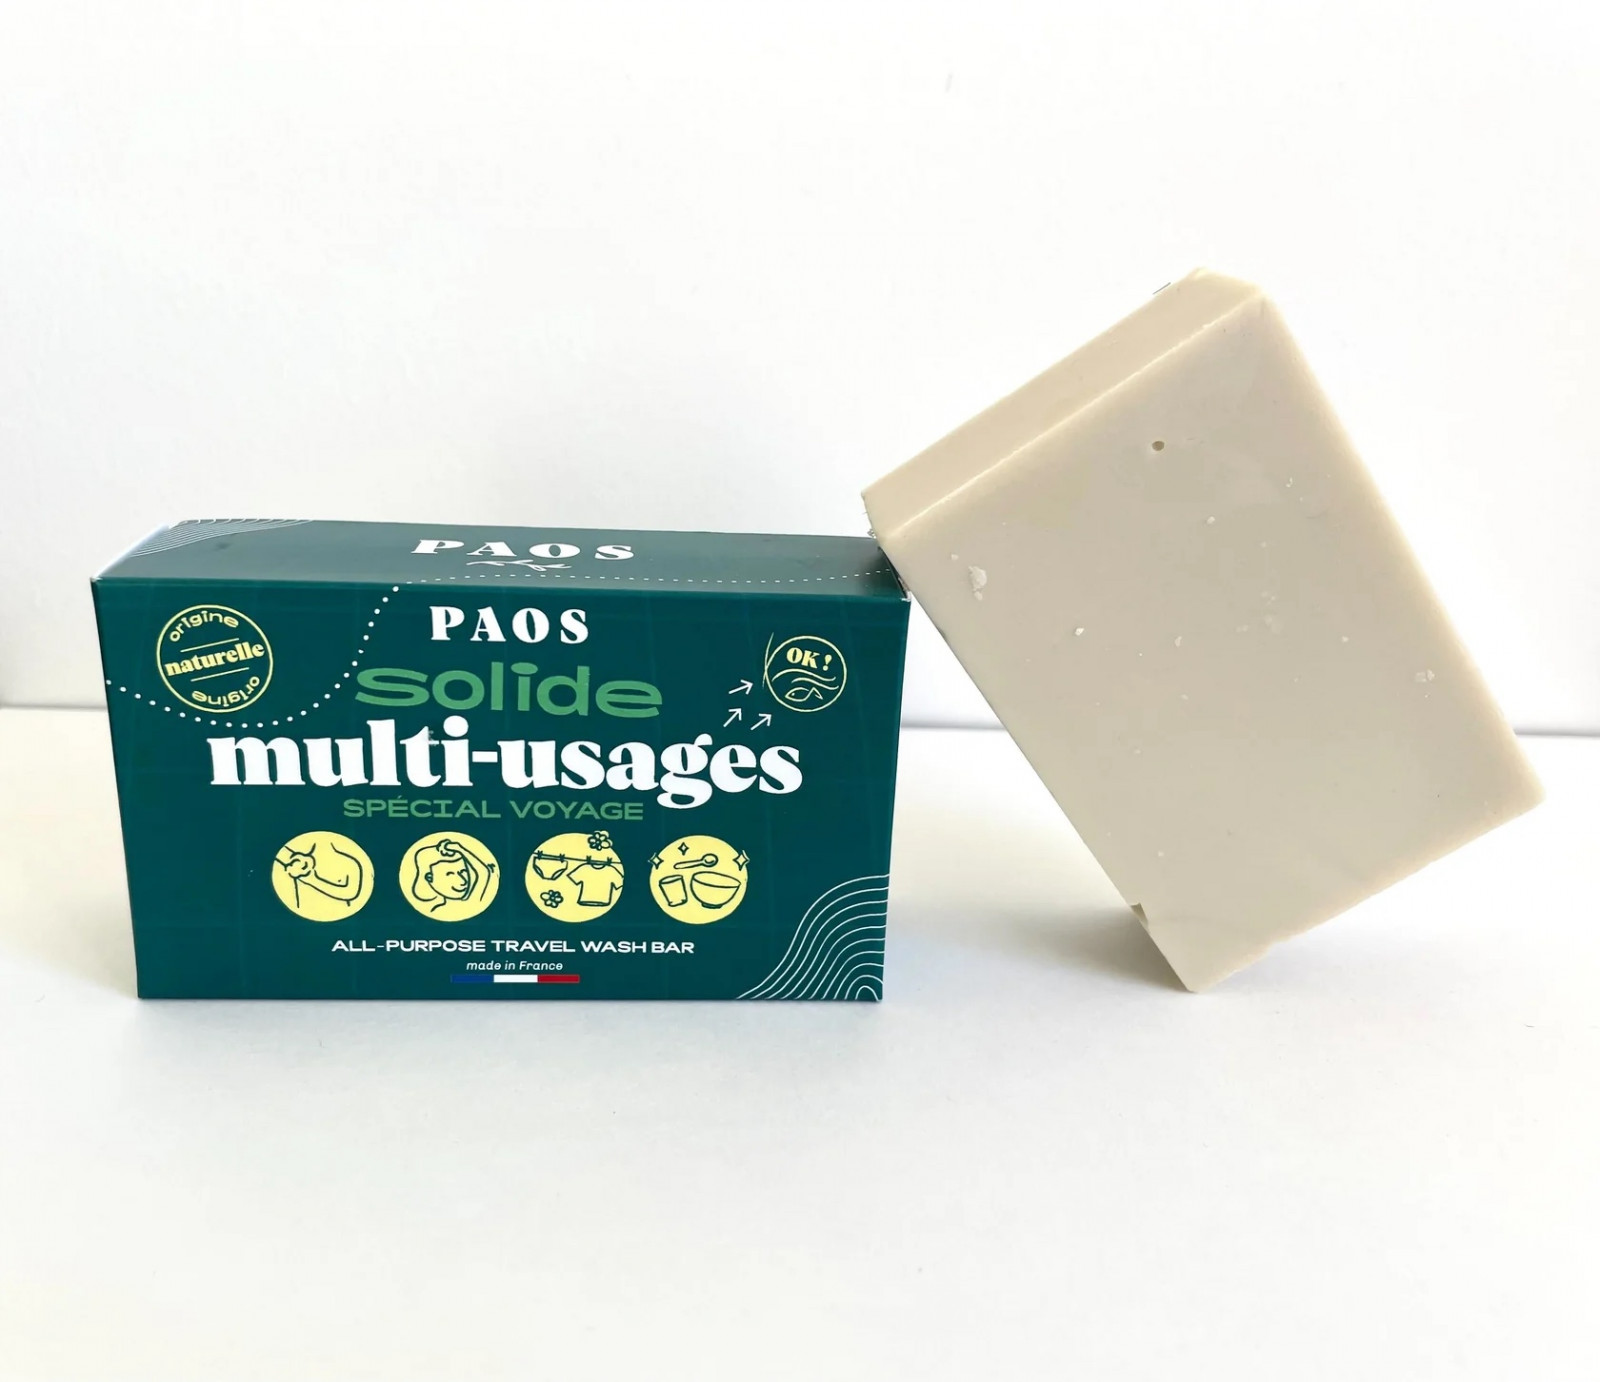 Solide multi-usages 100g paos